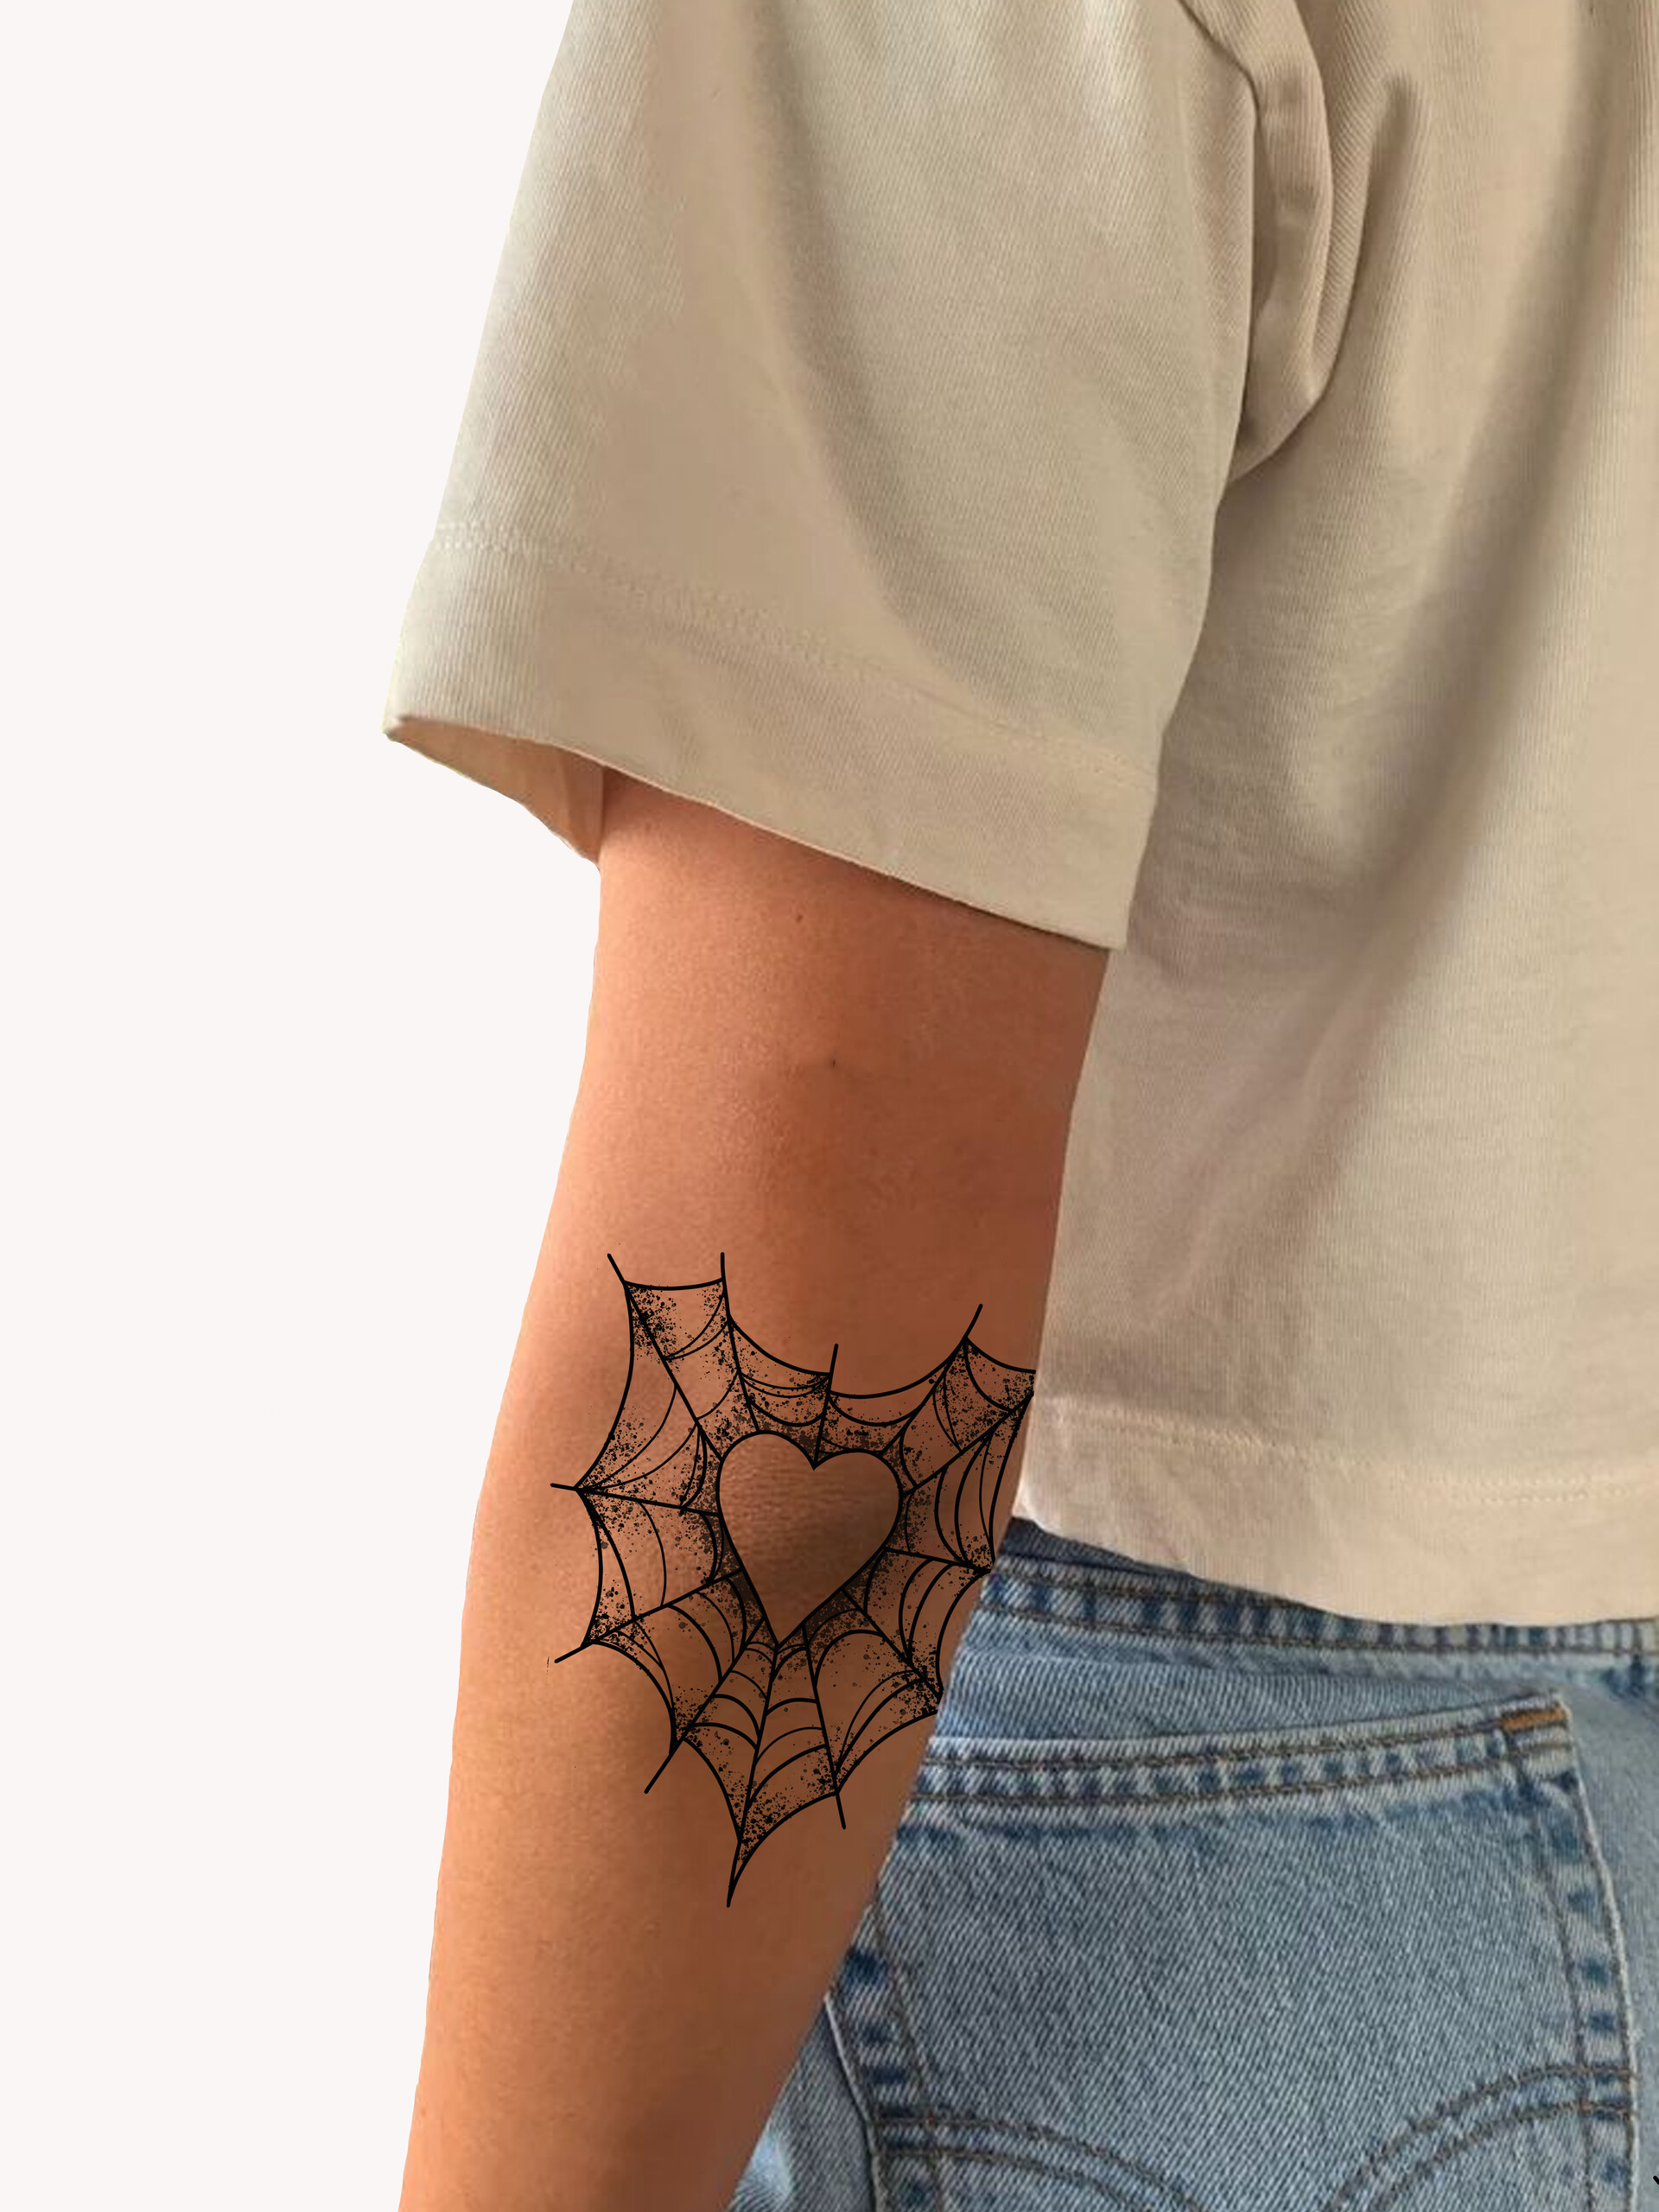 Aggregate 75 spider hanging from web tattoo super hot  thtantai2